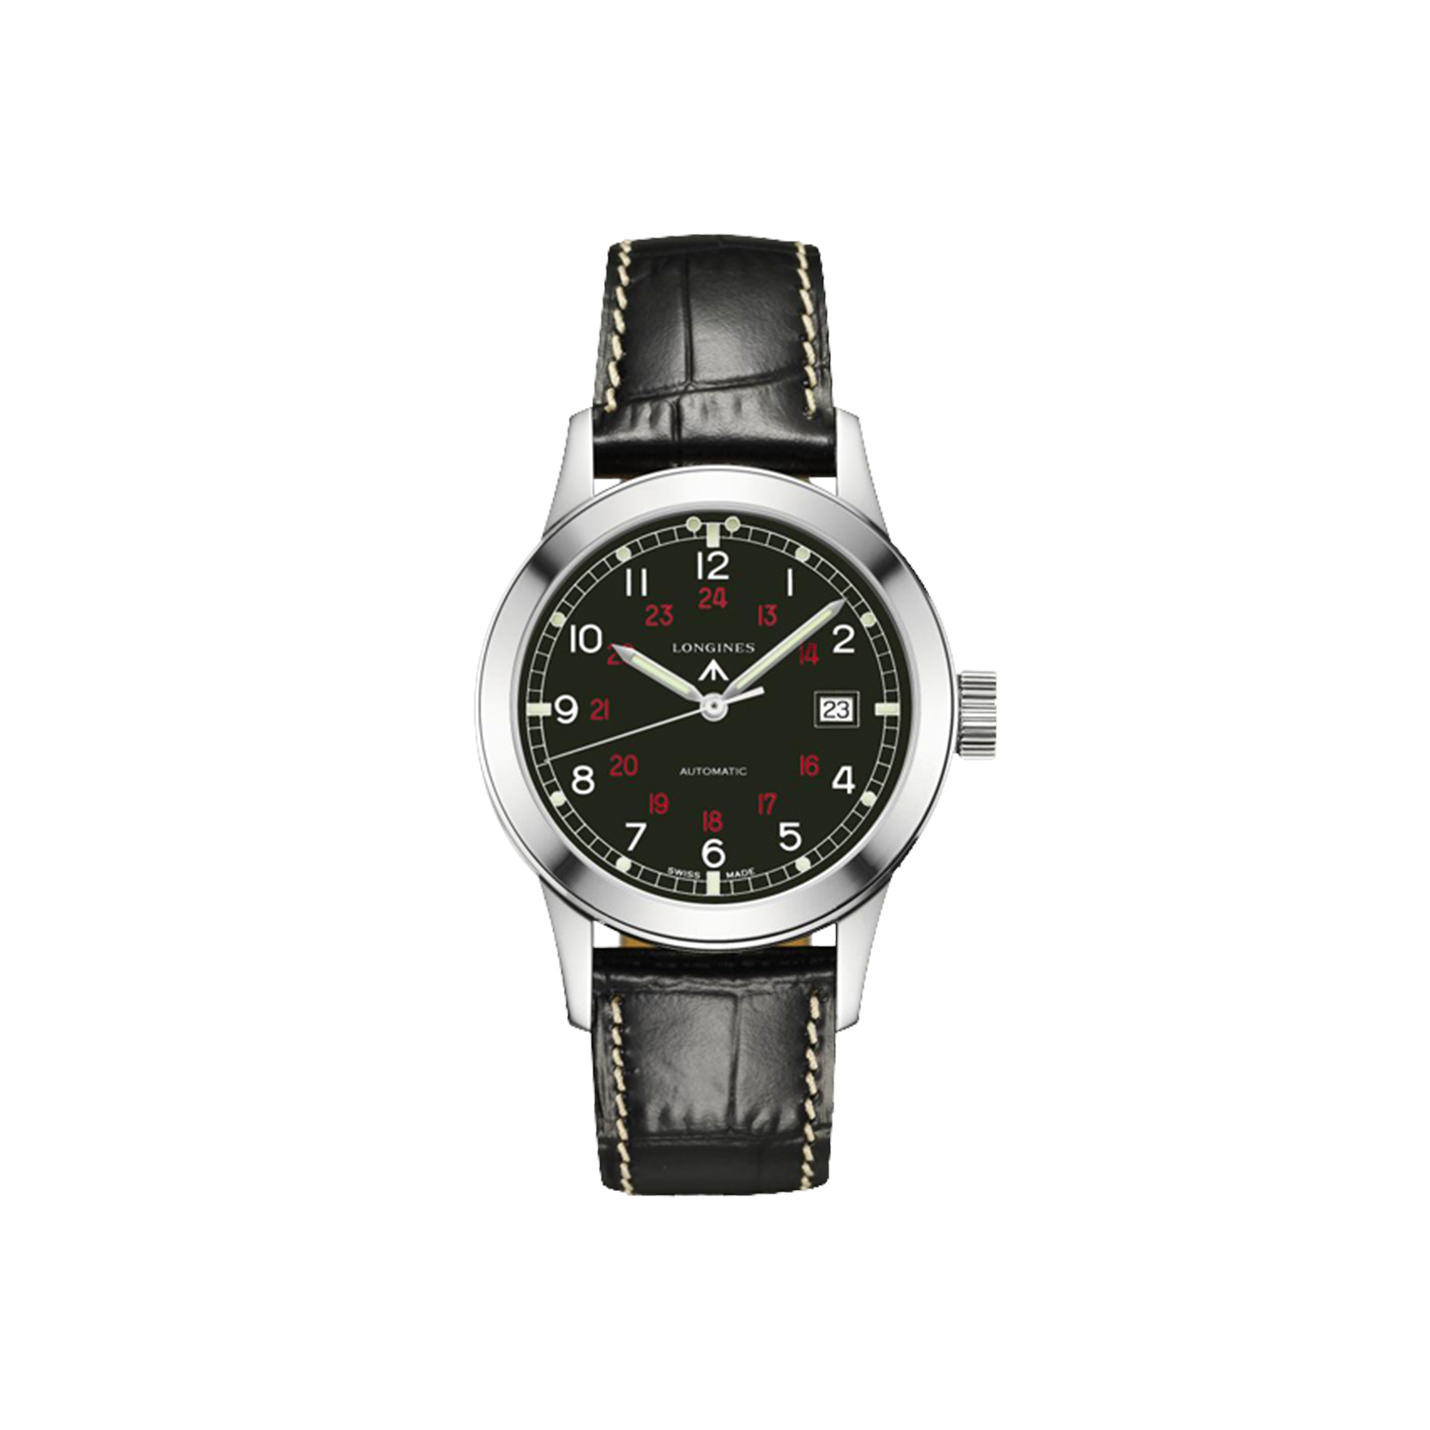 Longines Heritage Collection – COSD Military Watch